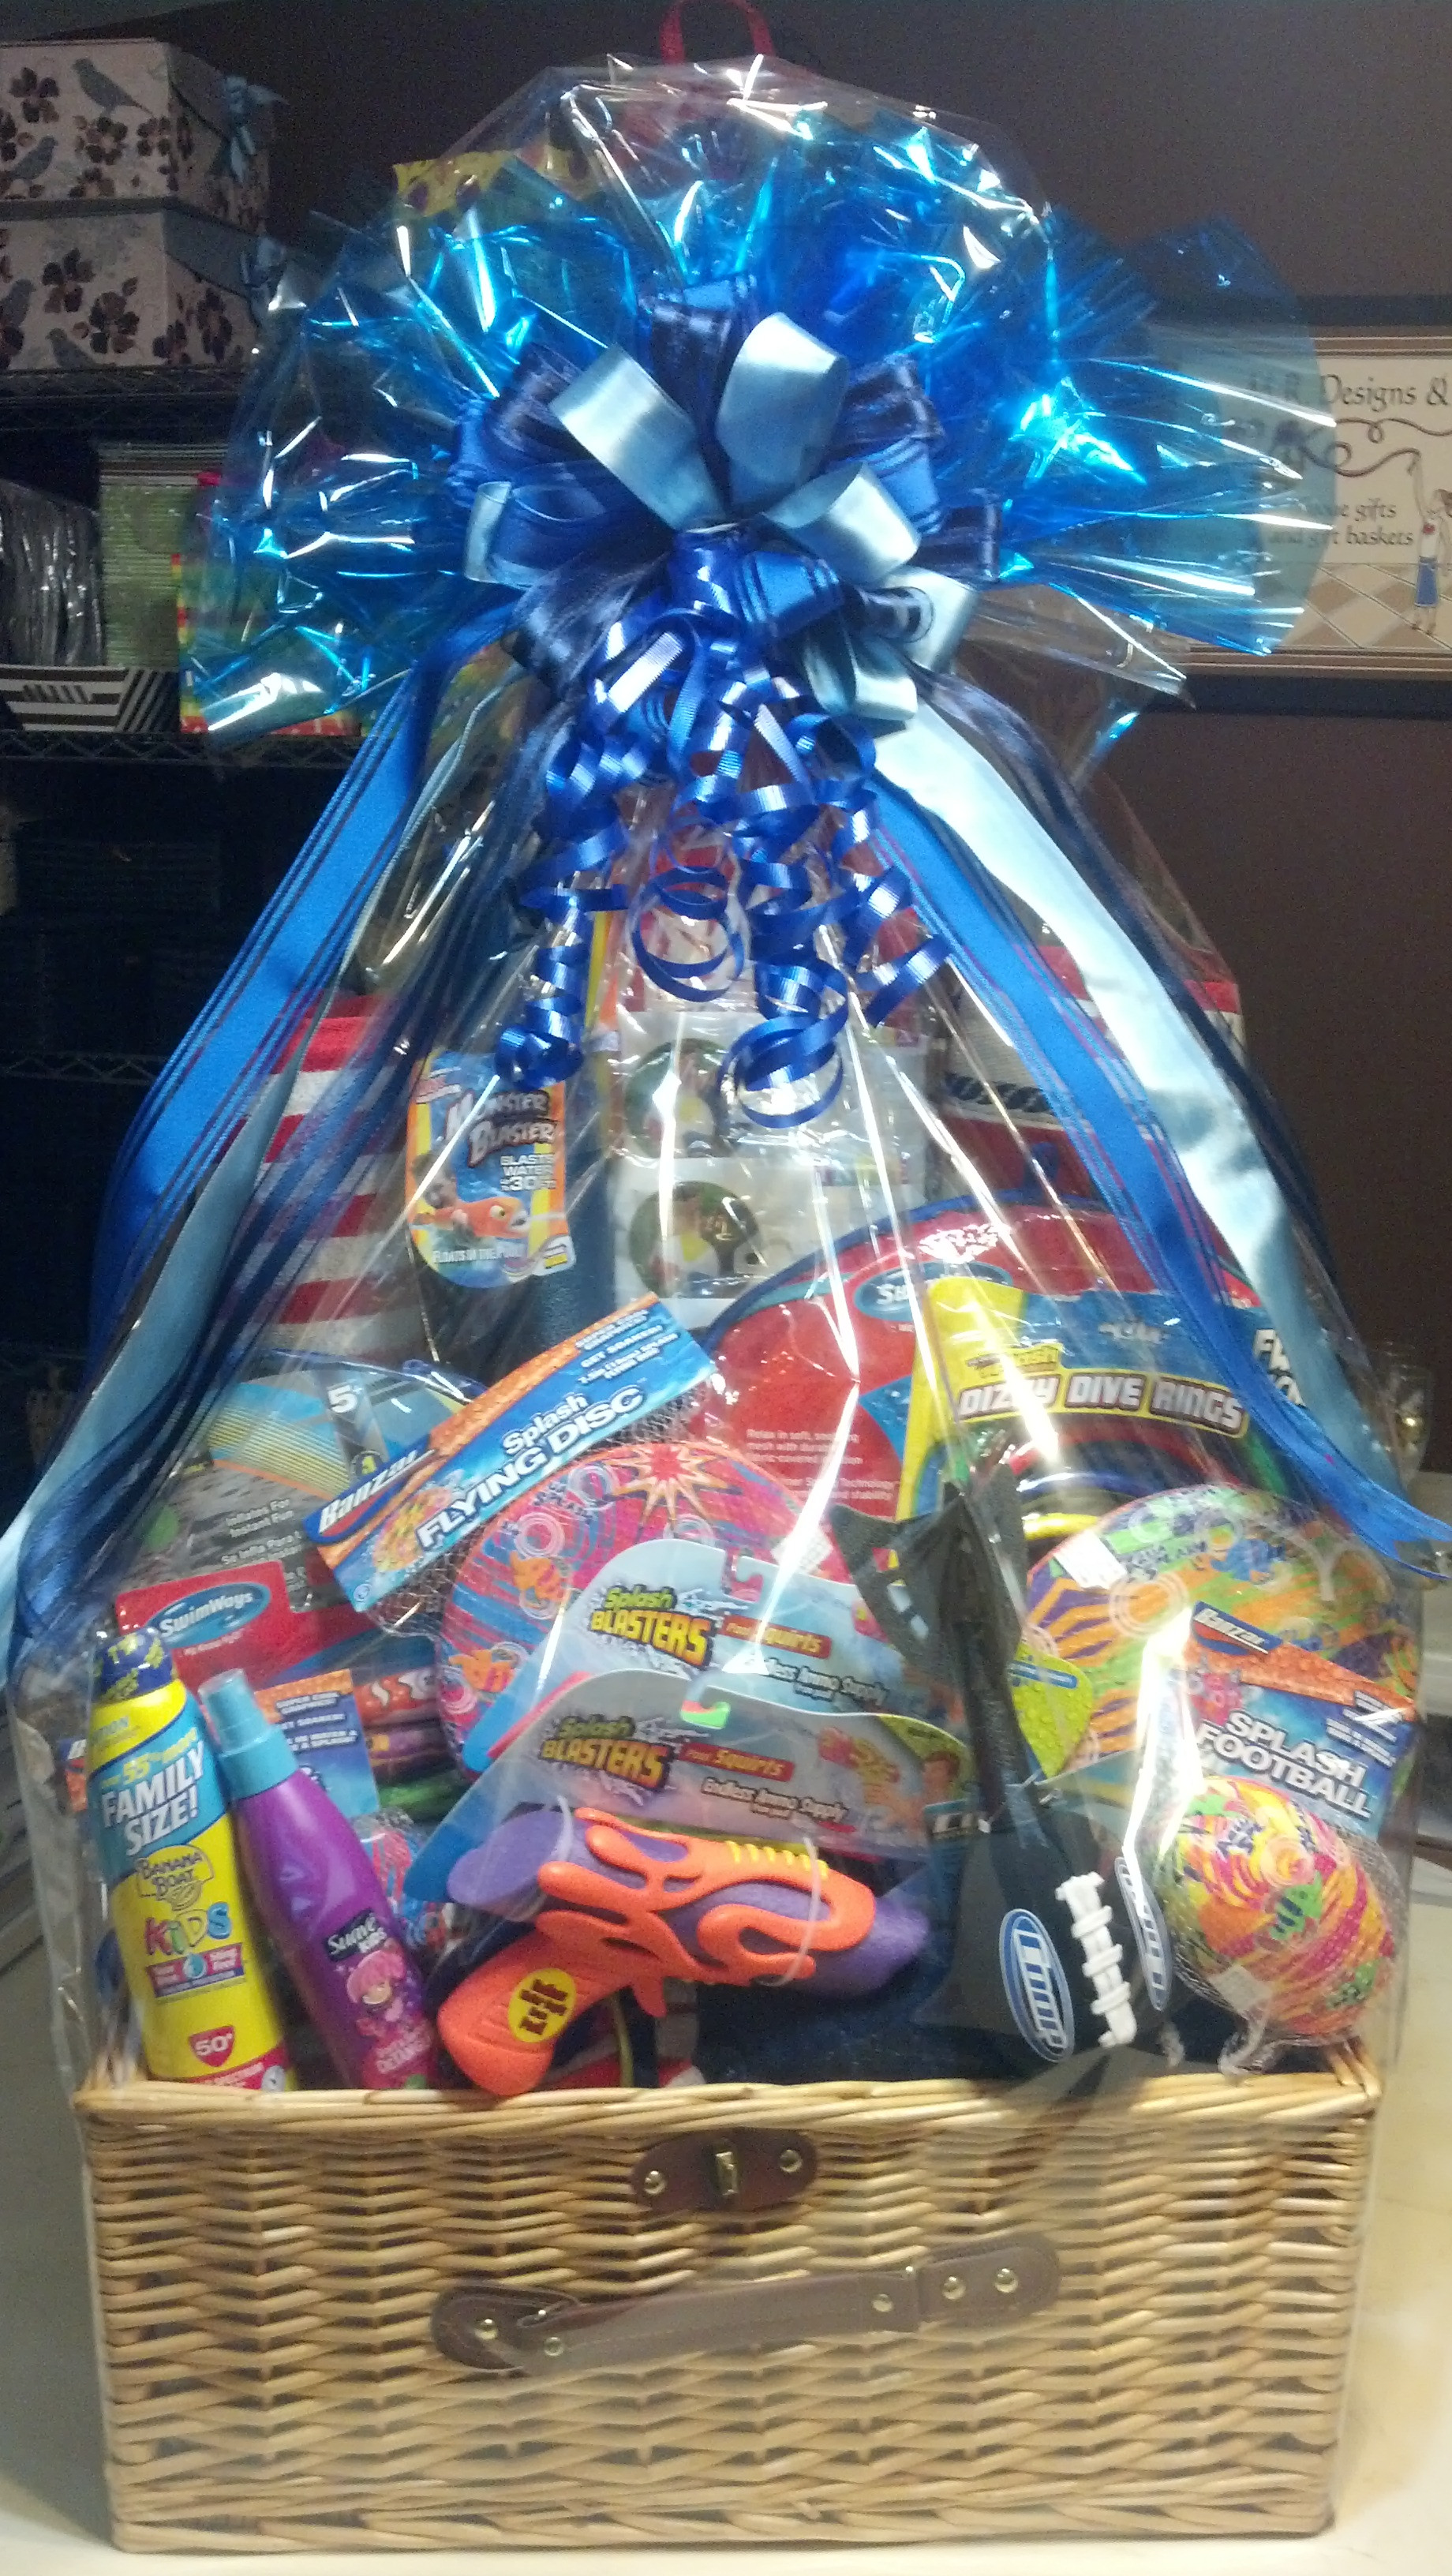 Gift Basket Ideas For Raffle Prizes
 Special Event and Silent Auction Gift Basket Ideas by M R